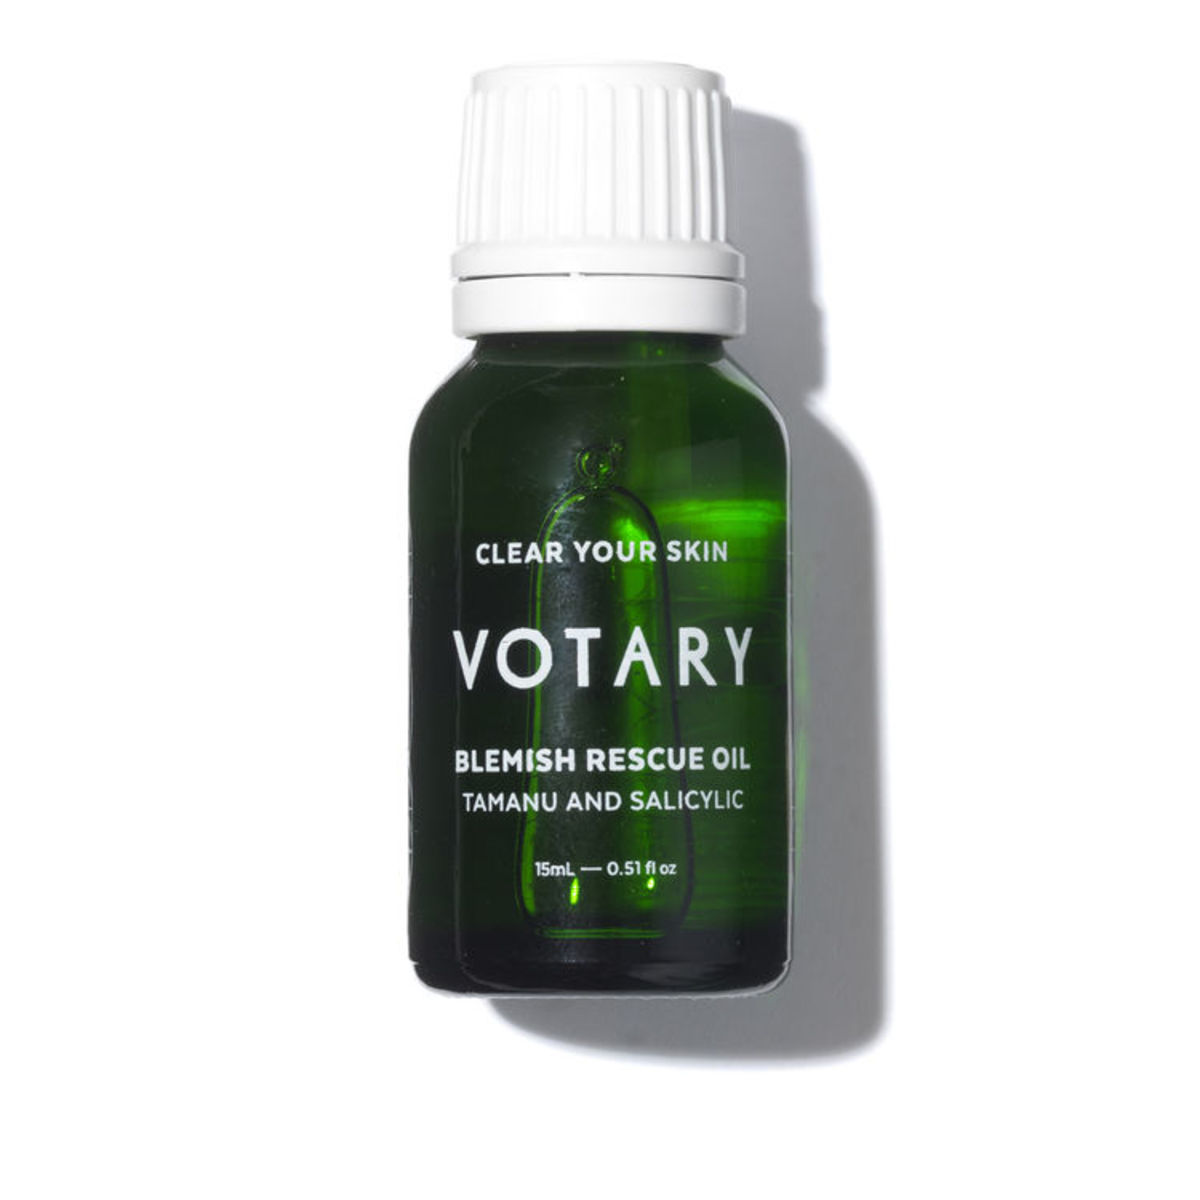 Votary Blemish Rescue Oil, $52, available here. Photo: Courtesy of Votary